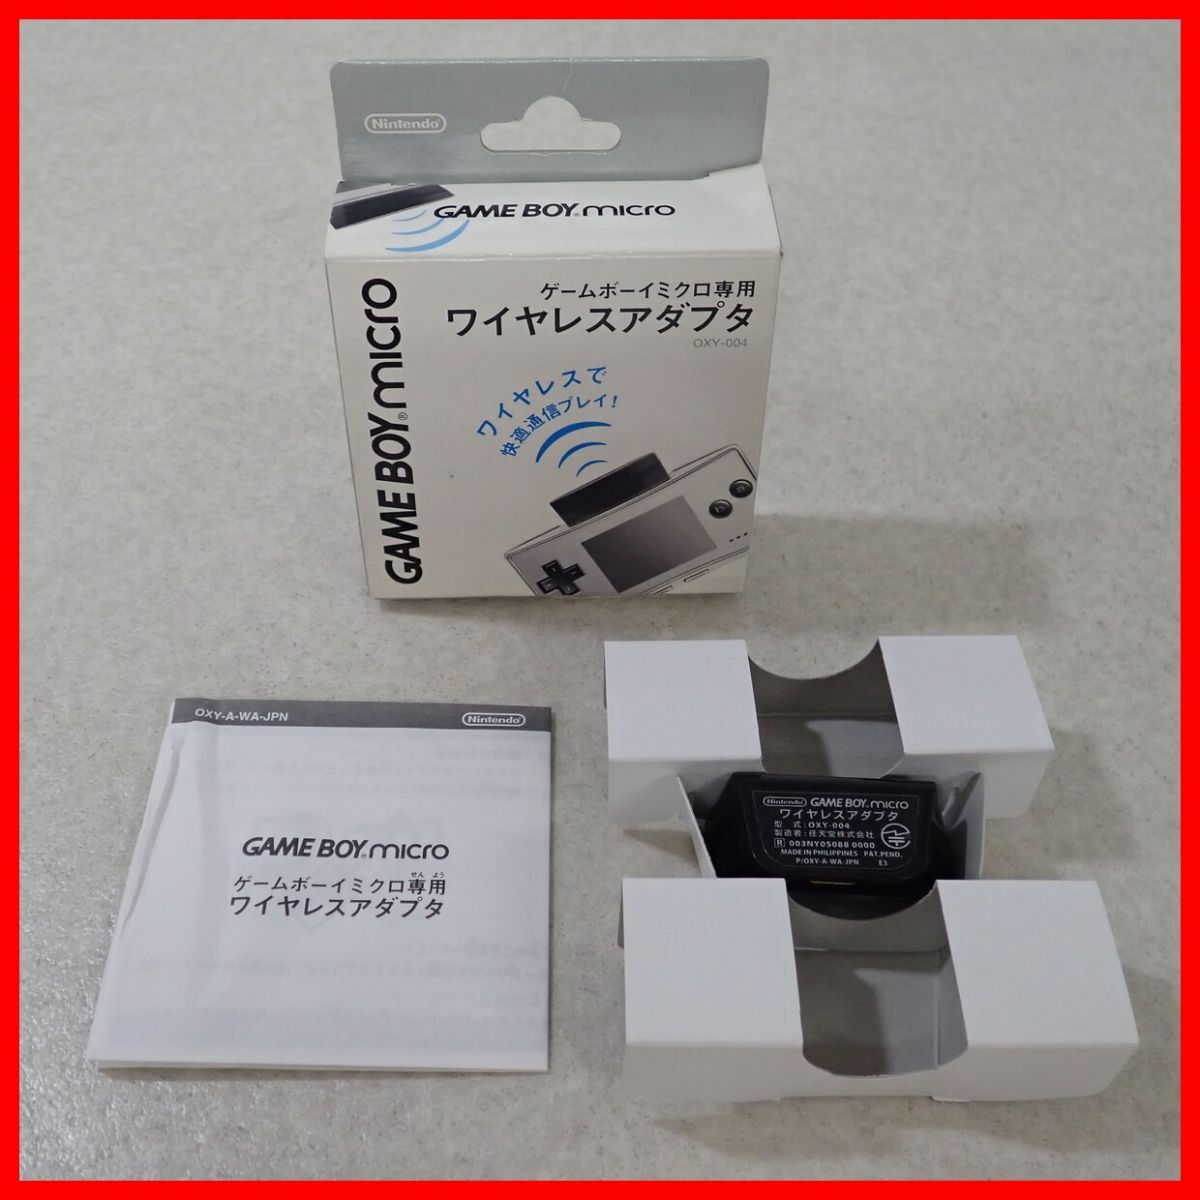  operation goods GAME BOY micro Game Boy Micro exclusive use wireless adapter OXY-004 nintendo Nintendo box opinion attaching [PP